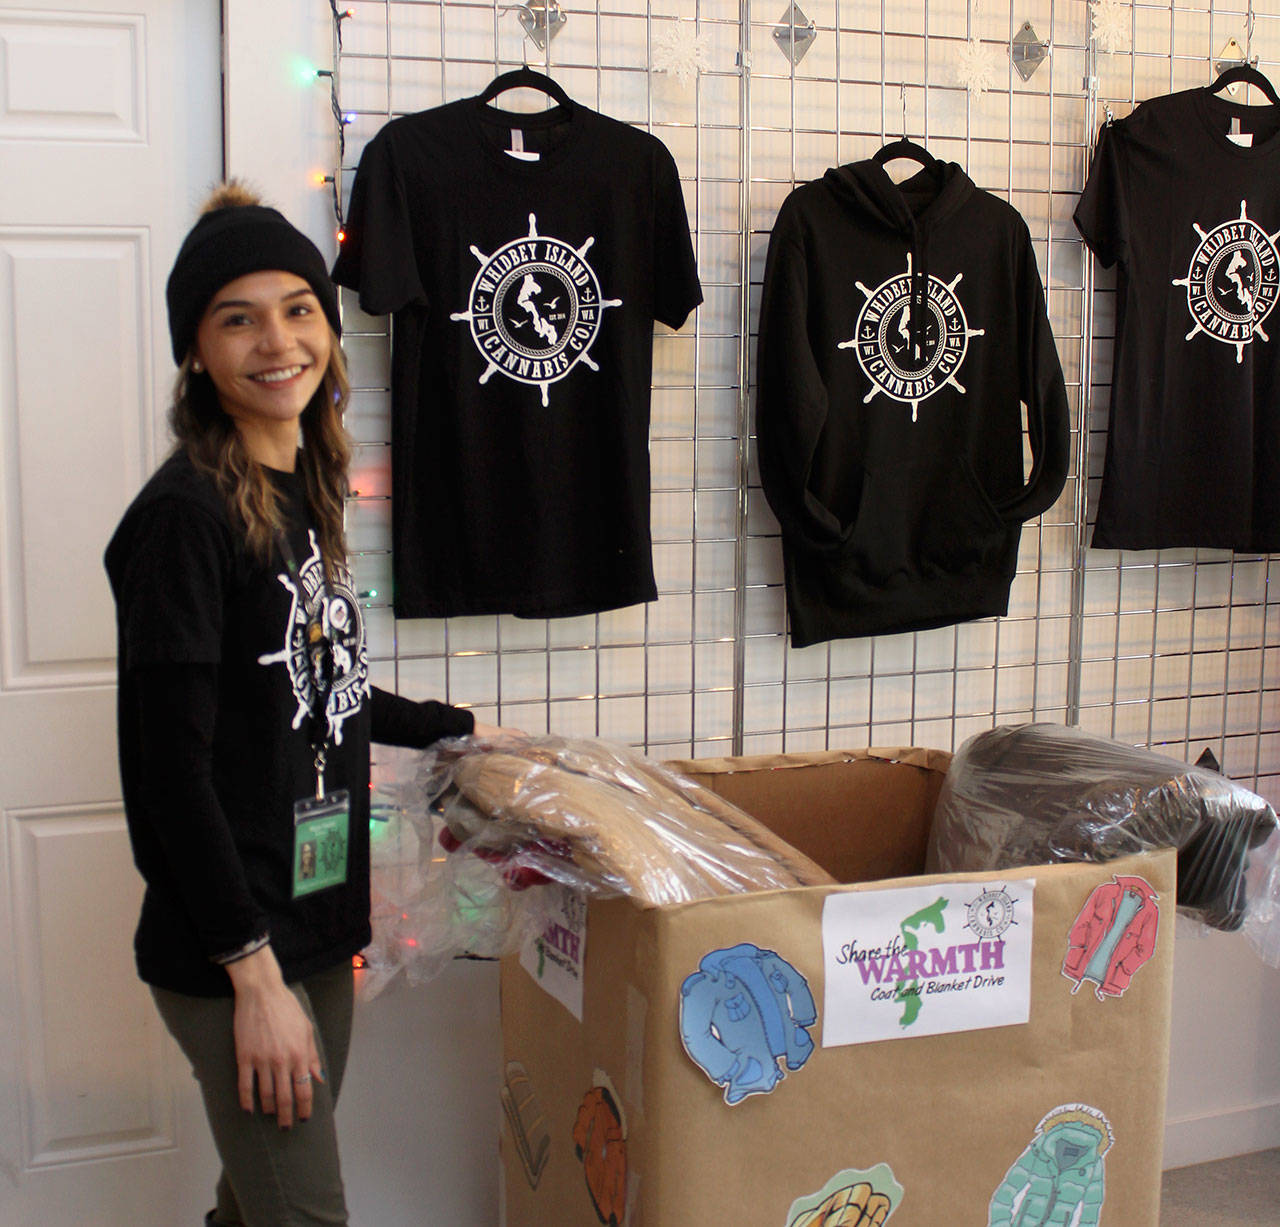 Budtender Megan Sinclair goes through coats recently donated for the homeless at Whidbey Island Cannabis Company in Freeland. The collection continues through January. (Photo by Patricia Guthrie/Whidbey News Group)